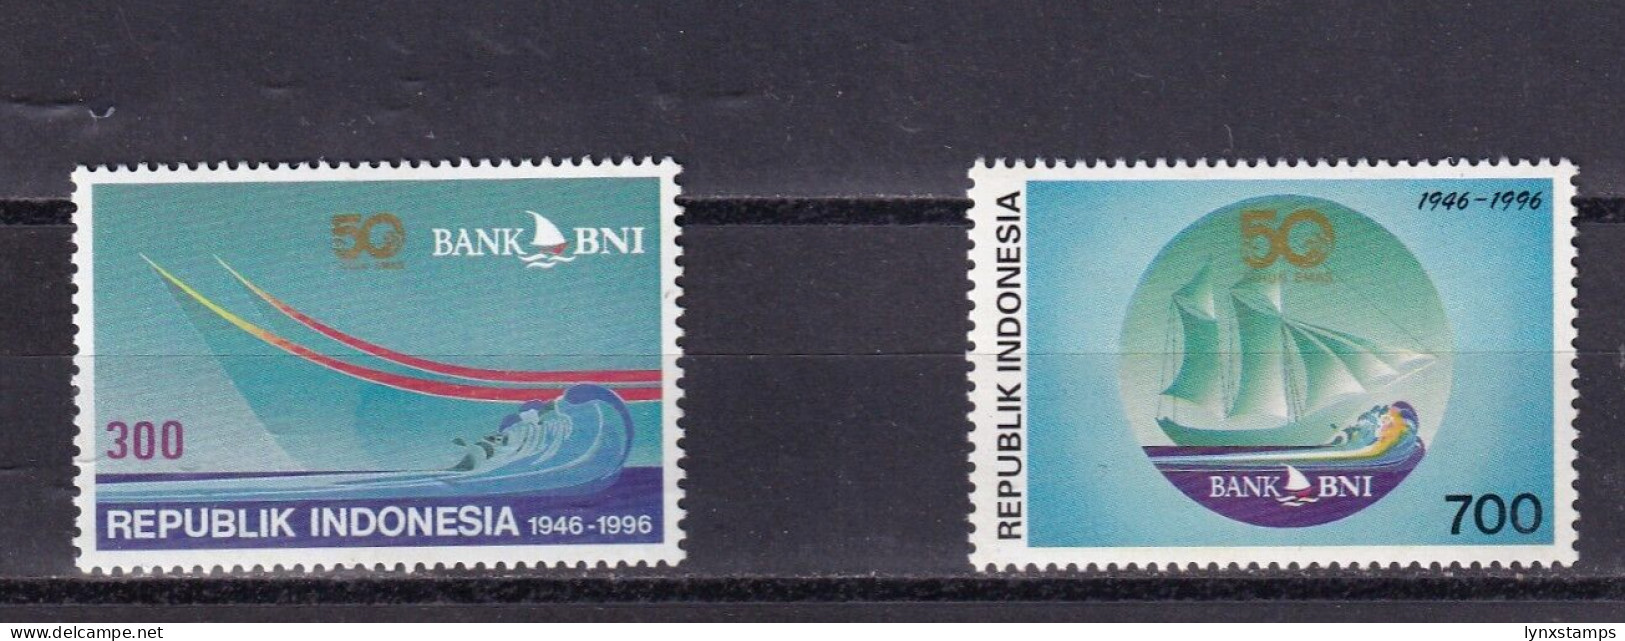 LI02 Indonesia 1996 The 50th Anniversary Of Bank BNI MInt Stamps - Indonesia